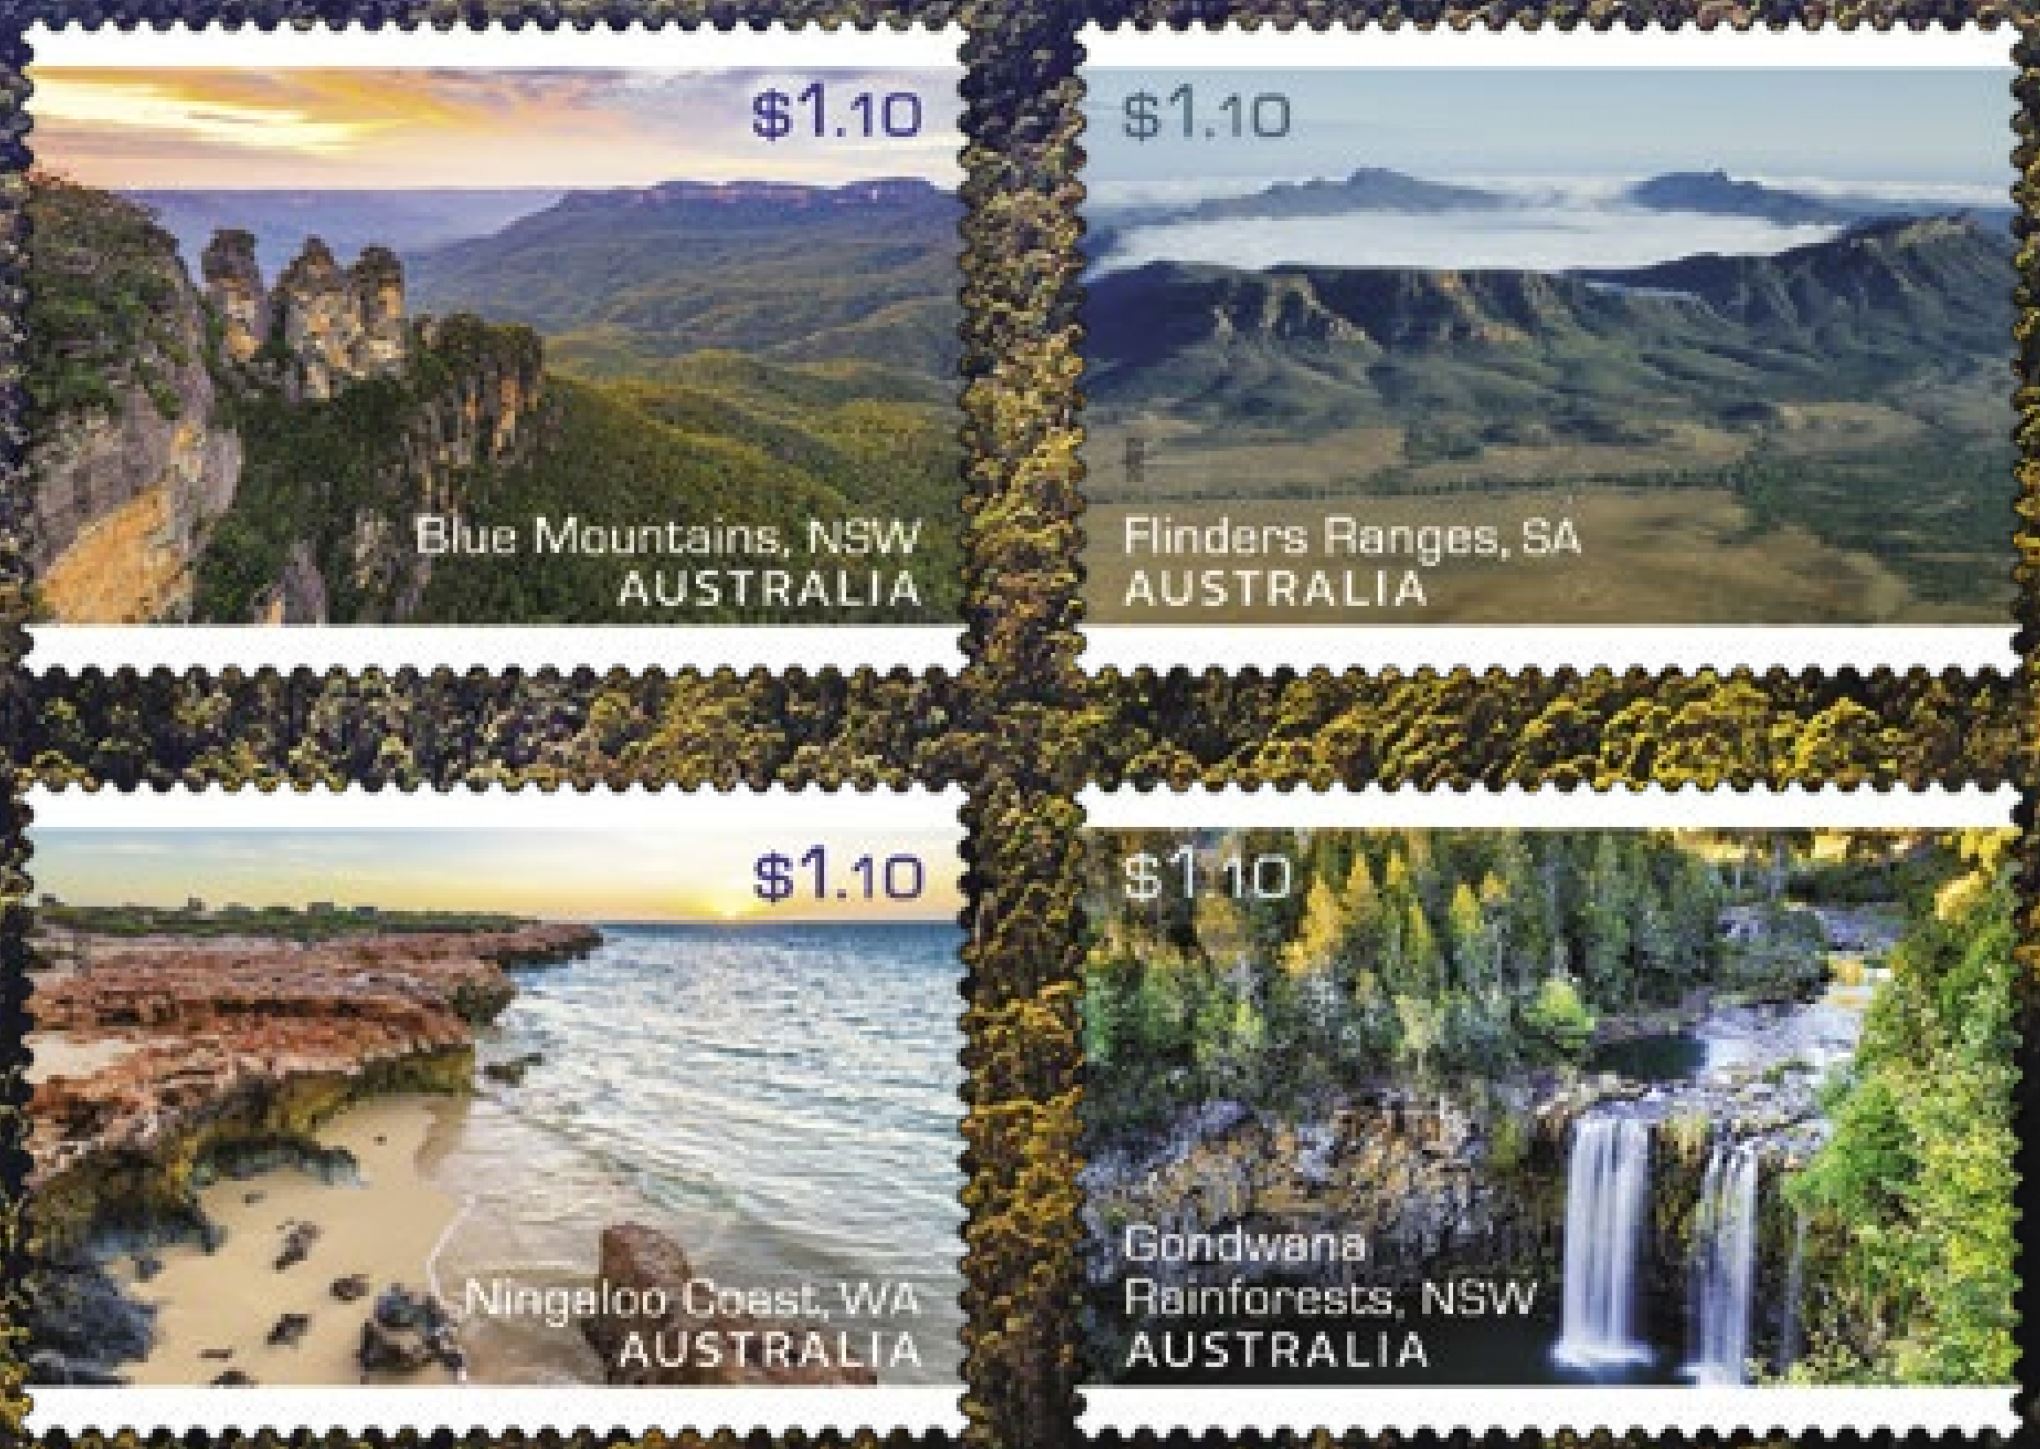 Fossil sites on stamps of Australia 2022